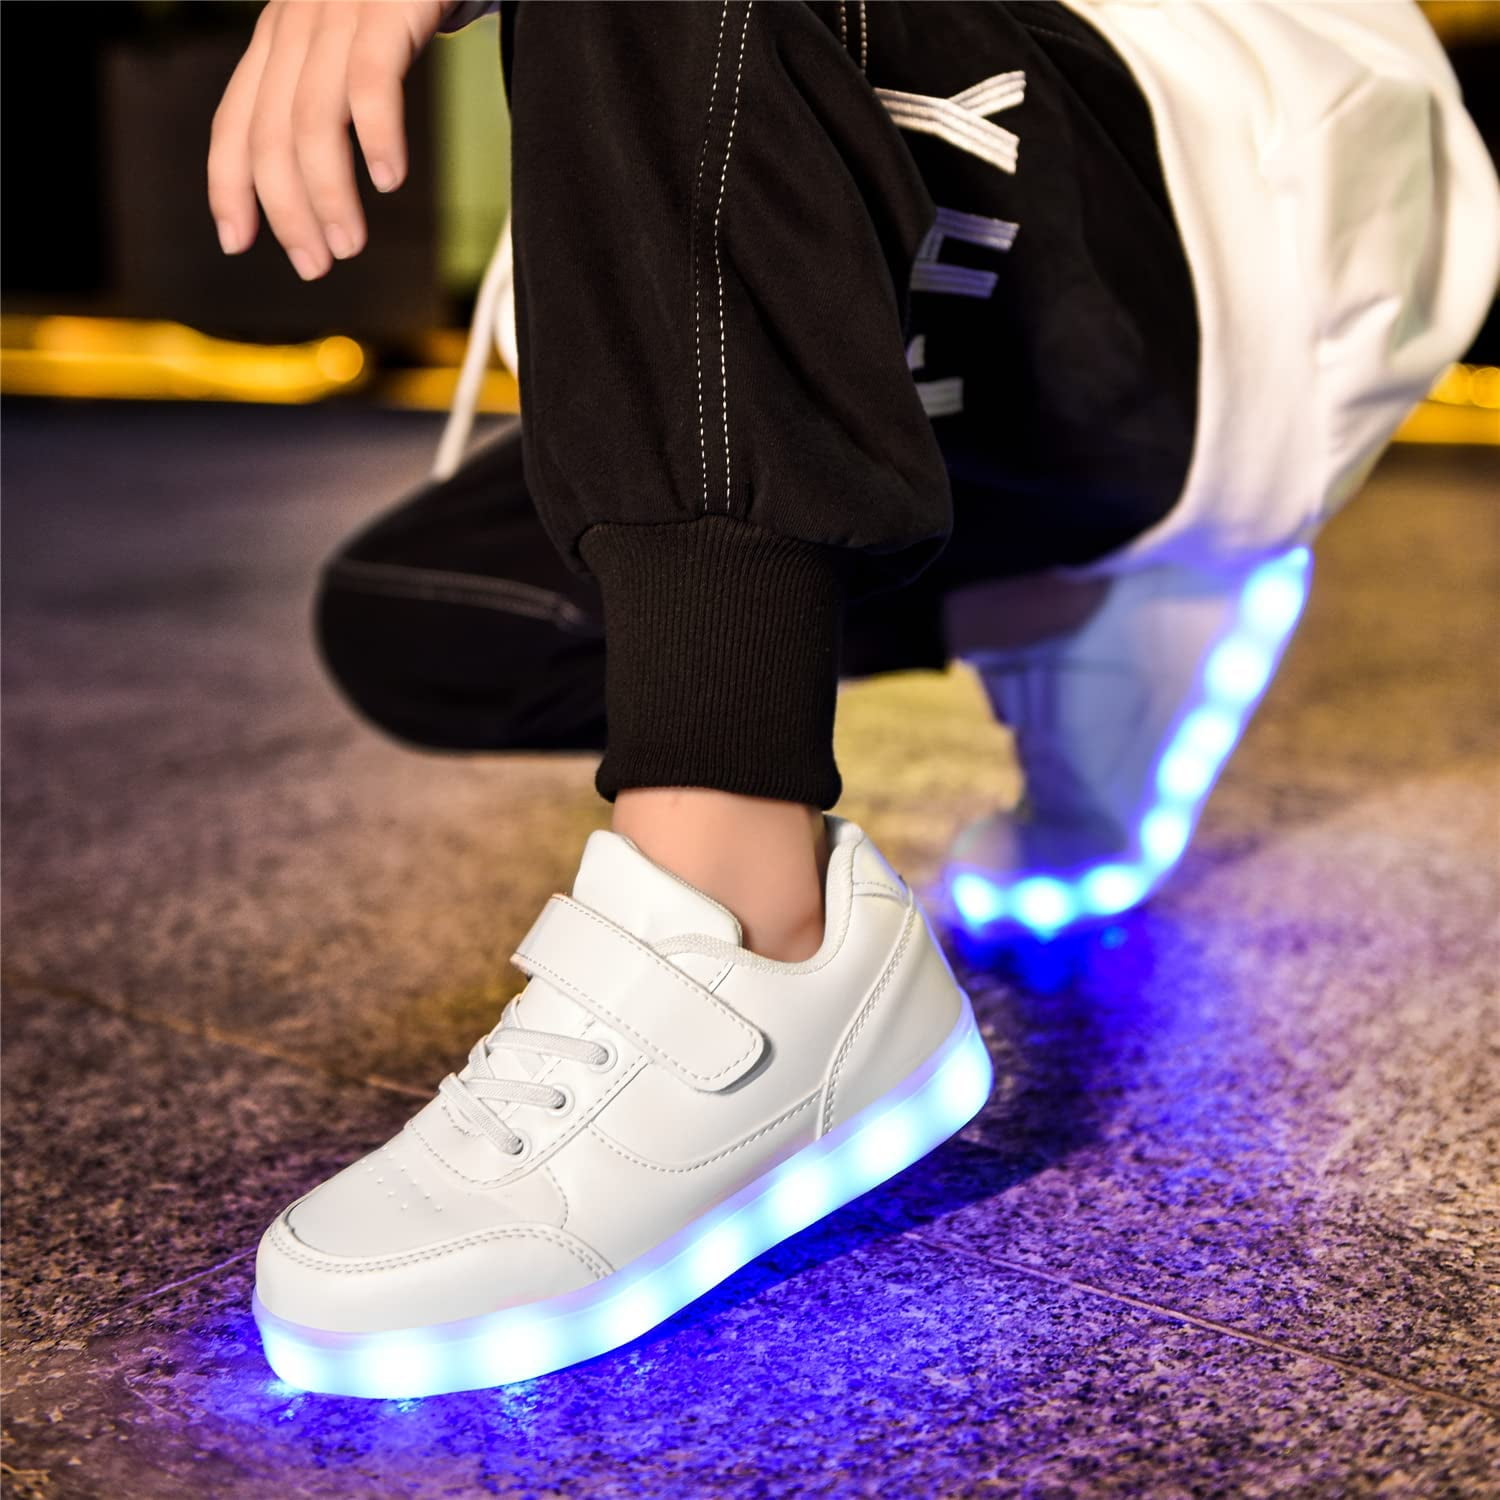 LED Light Up Sport Shoes For Boys For Girls And Boys ENWAYEL Bebe Toddler  Baby Children Sneakers 201130225y From Ugzmp, $37.65 | DHgate.Com